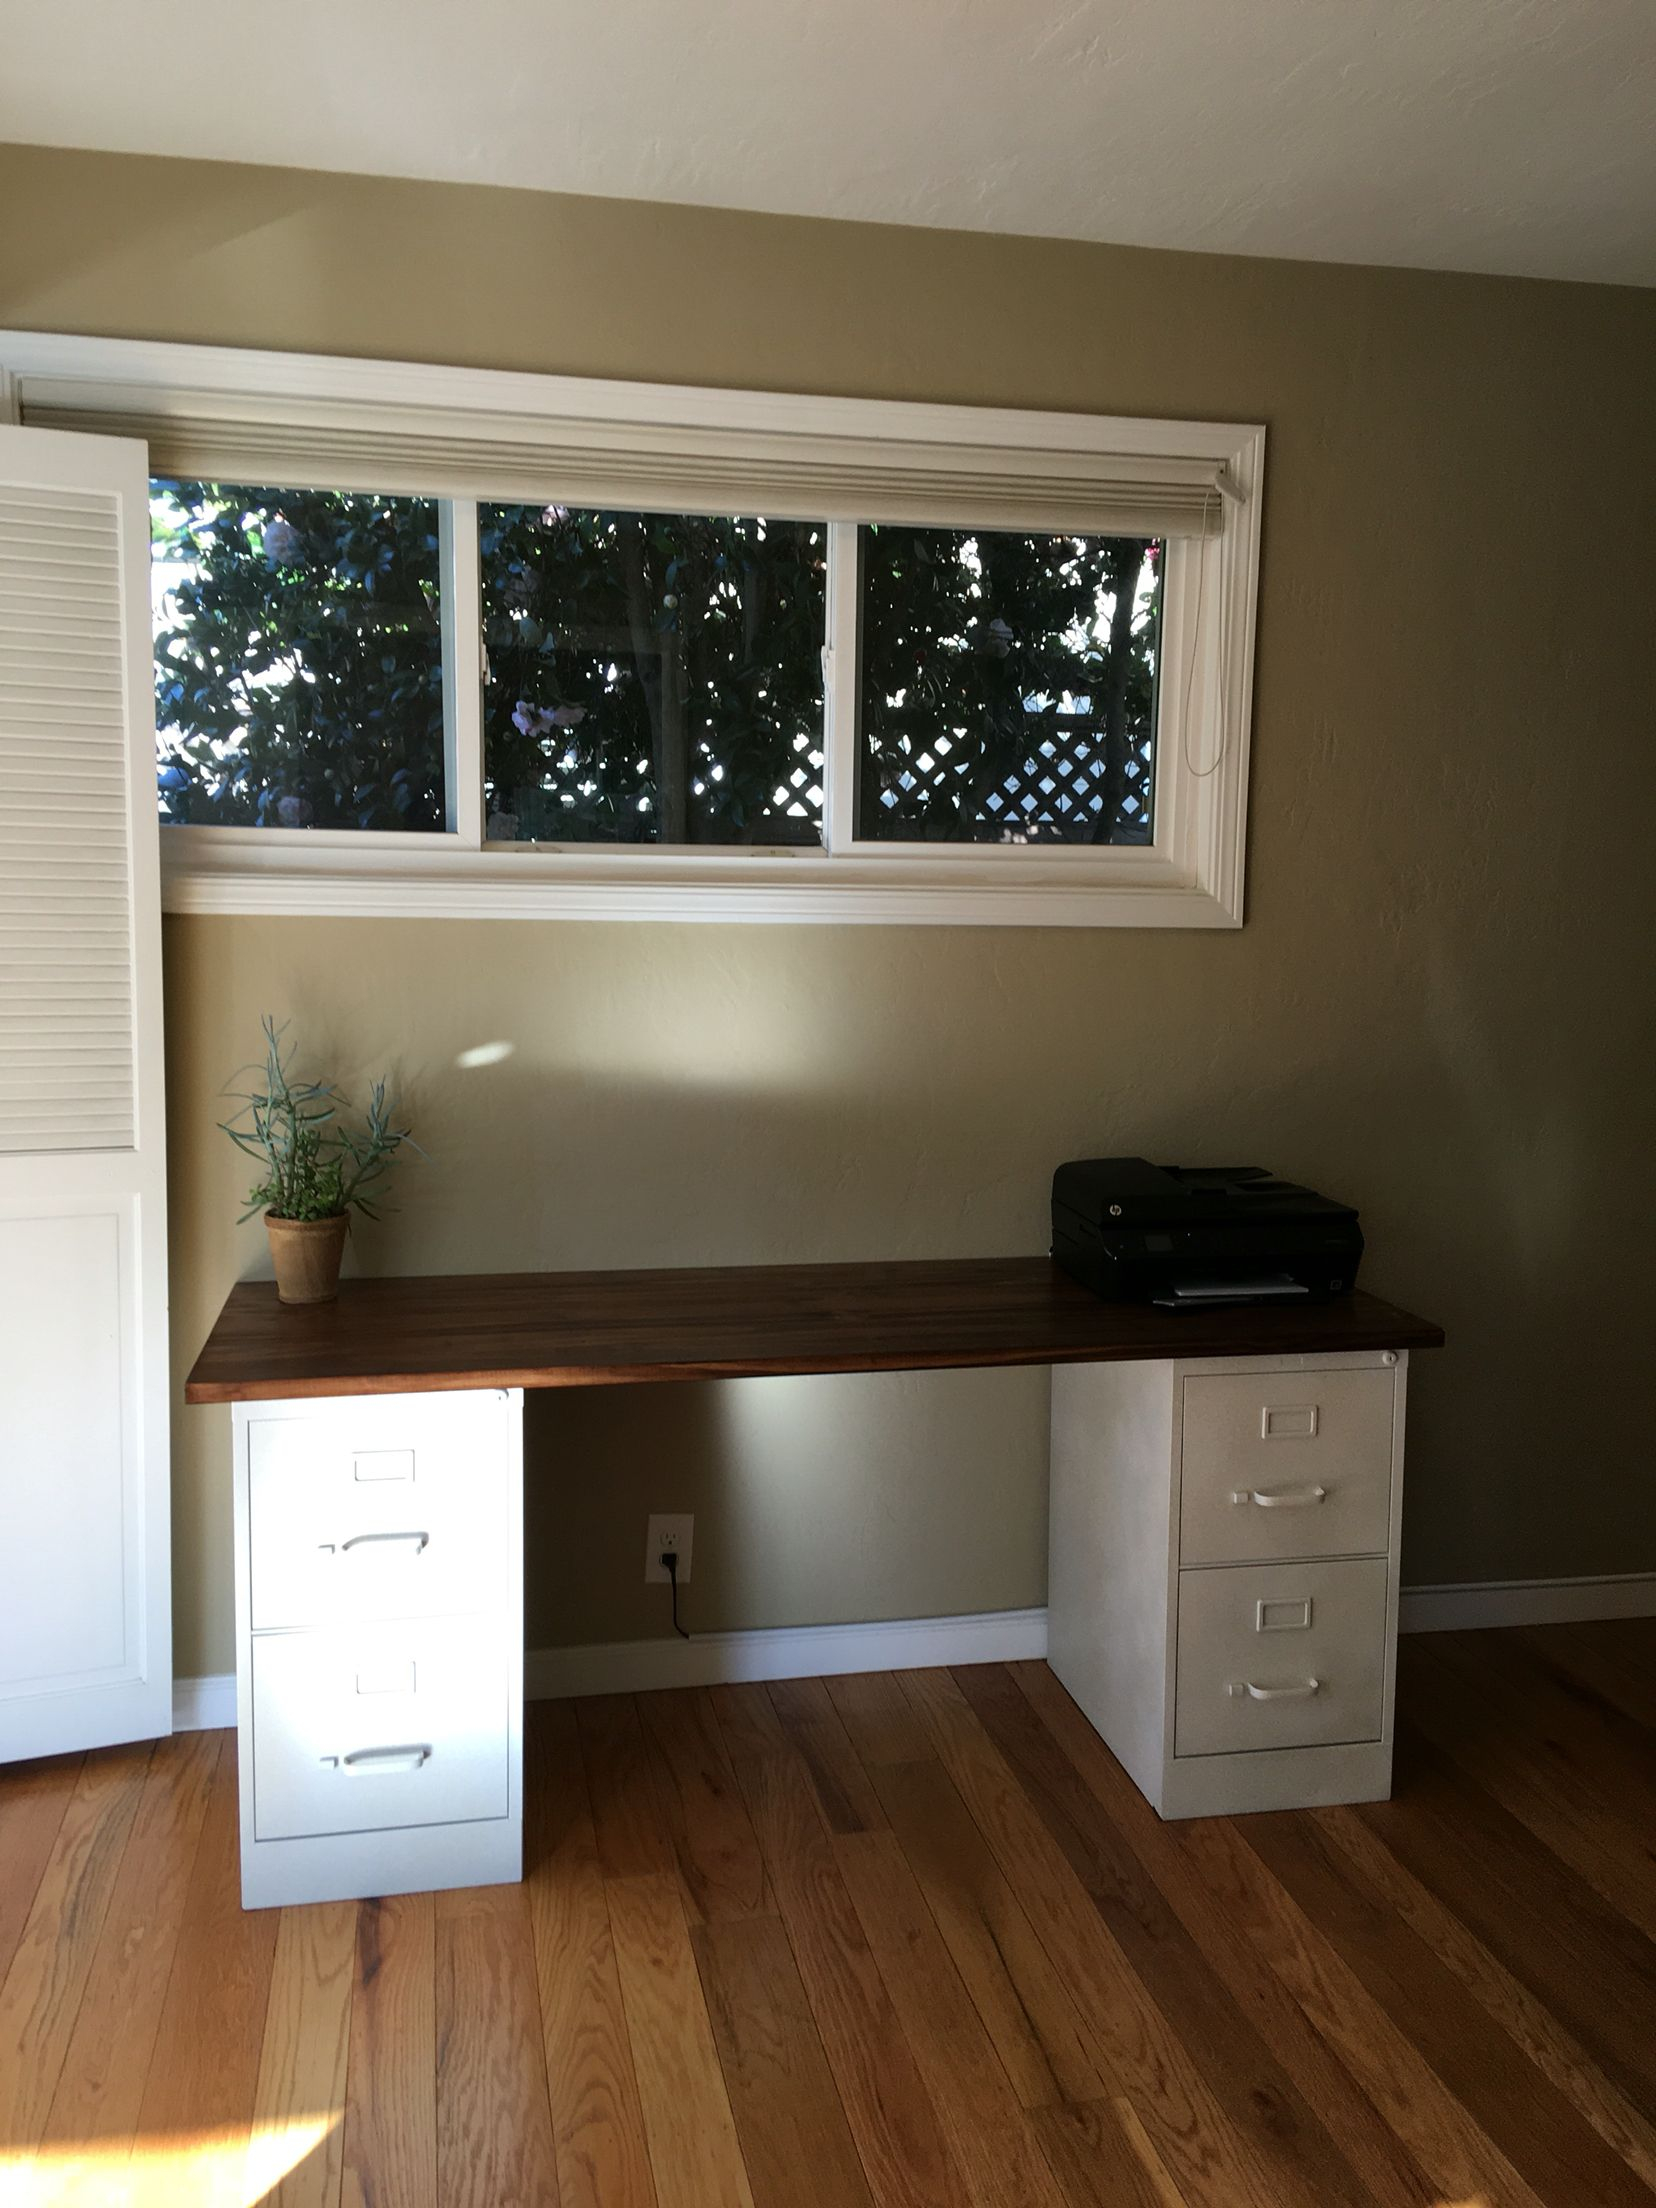 Diy Desk Made From Spray Painted Filing Cabinets With A Stained Wood pertaining to dimensions 1656 X 2208